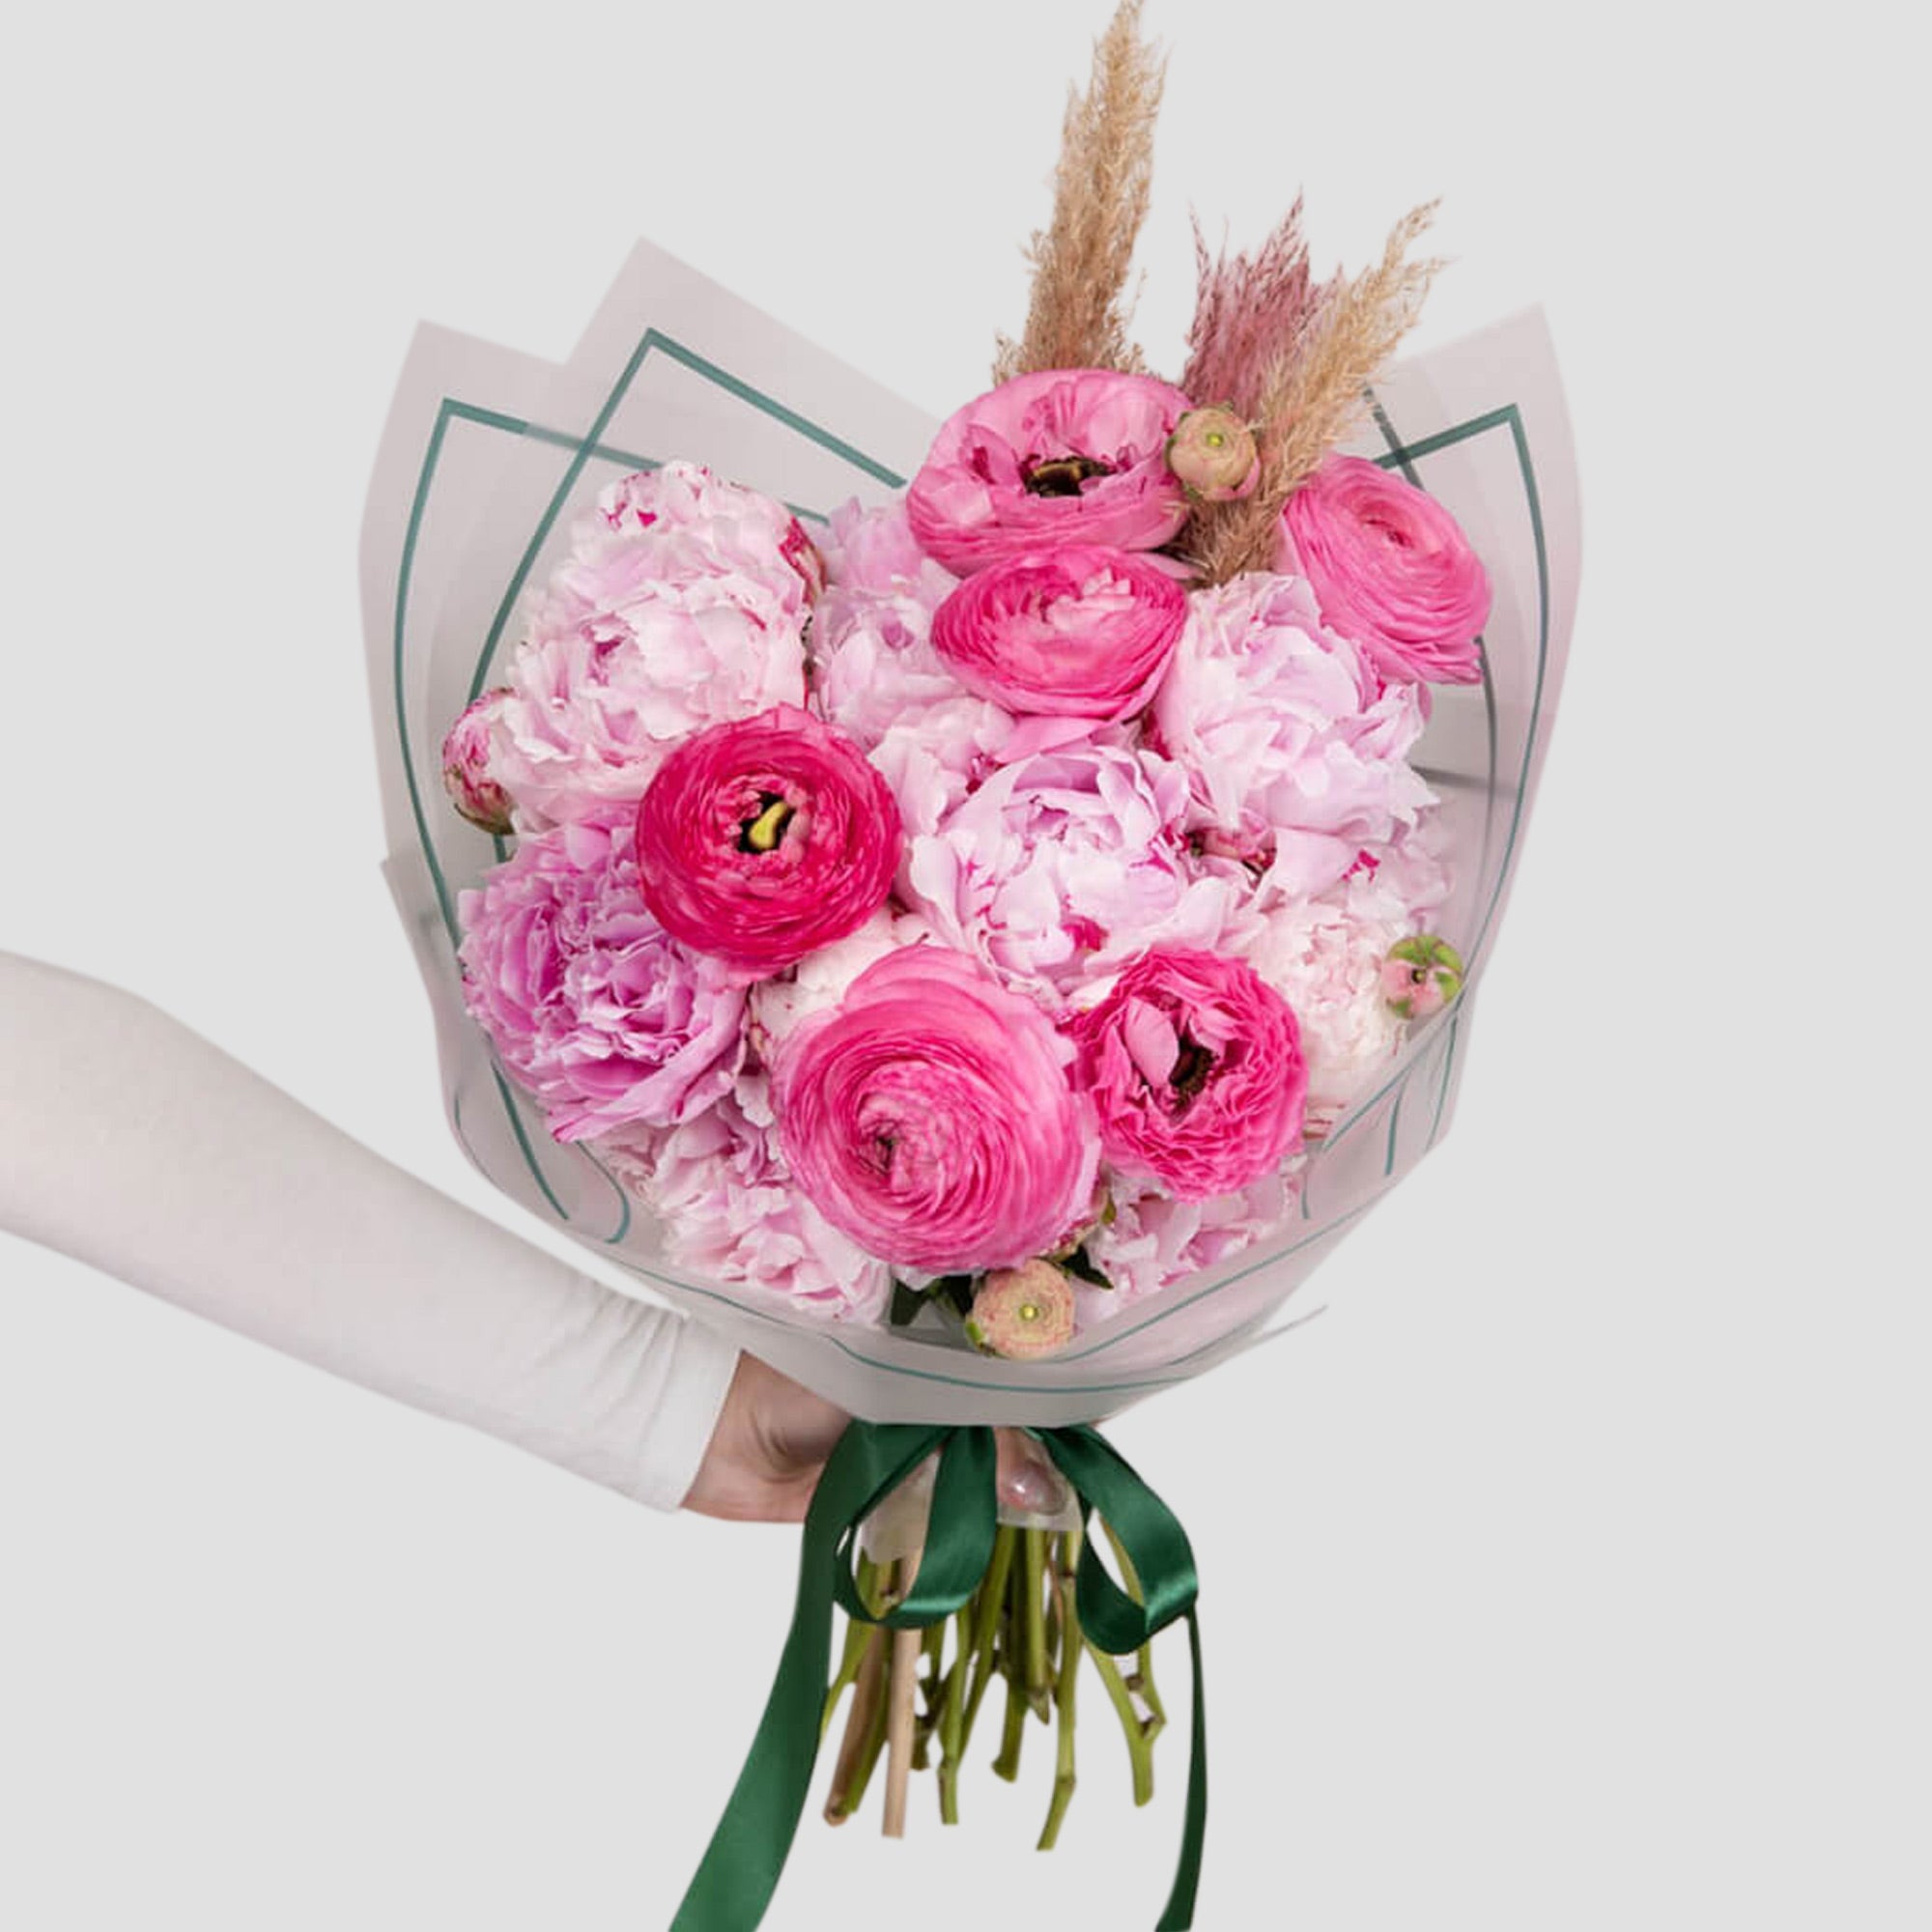 Bouquet with peonies and ranunculus